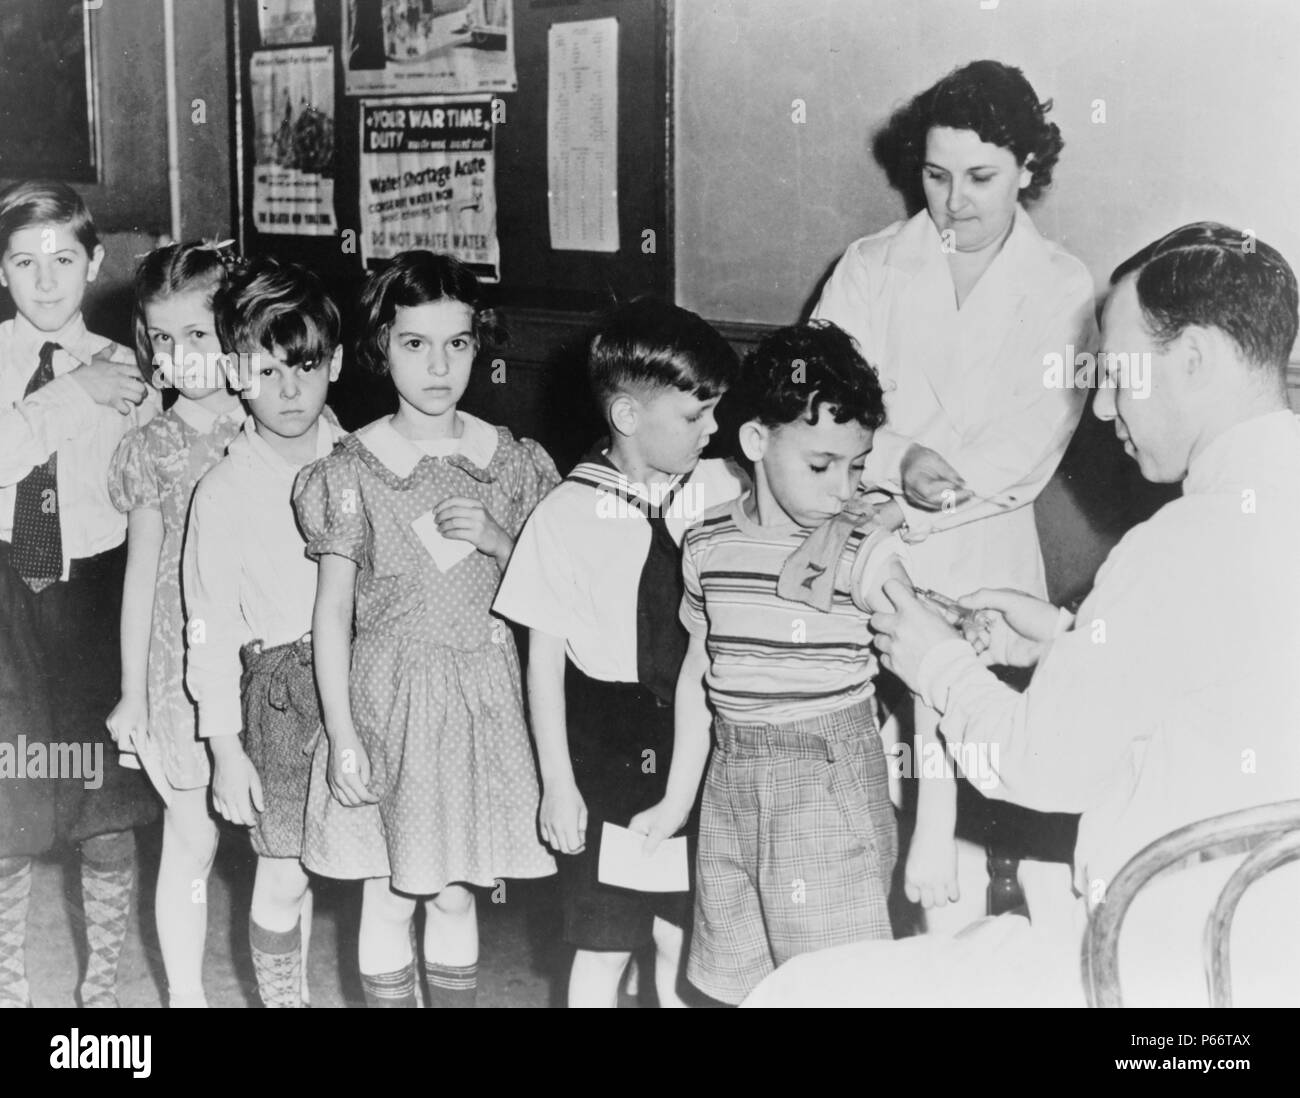 Health in a U.S. city is a concern as children await inoculation and immunization shots at a child health station in New York City, N.Y. 1944. Stock Photo